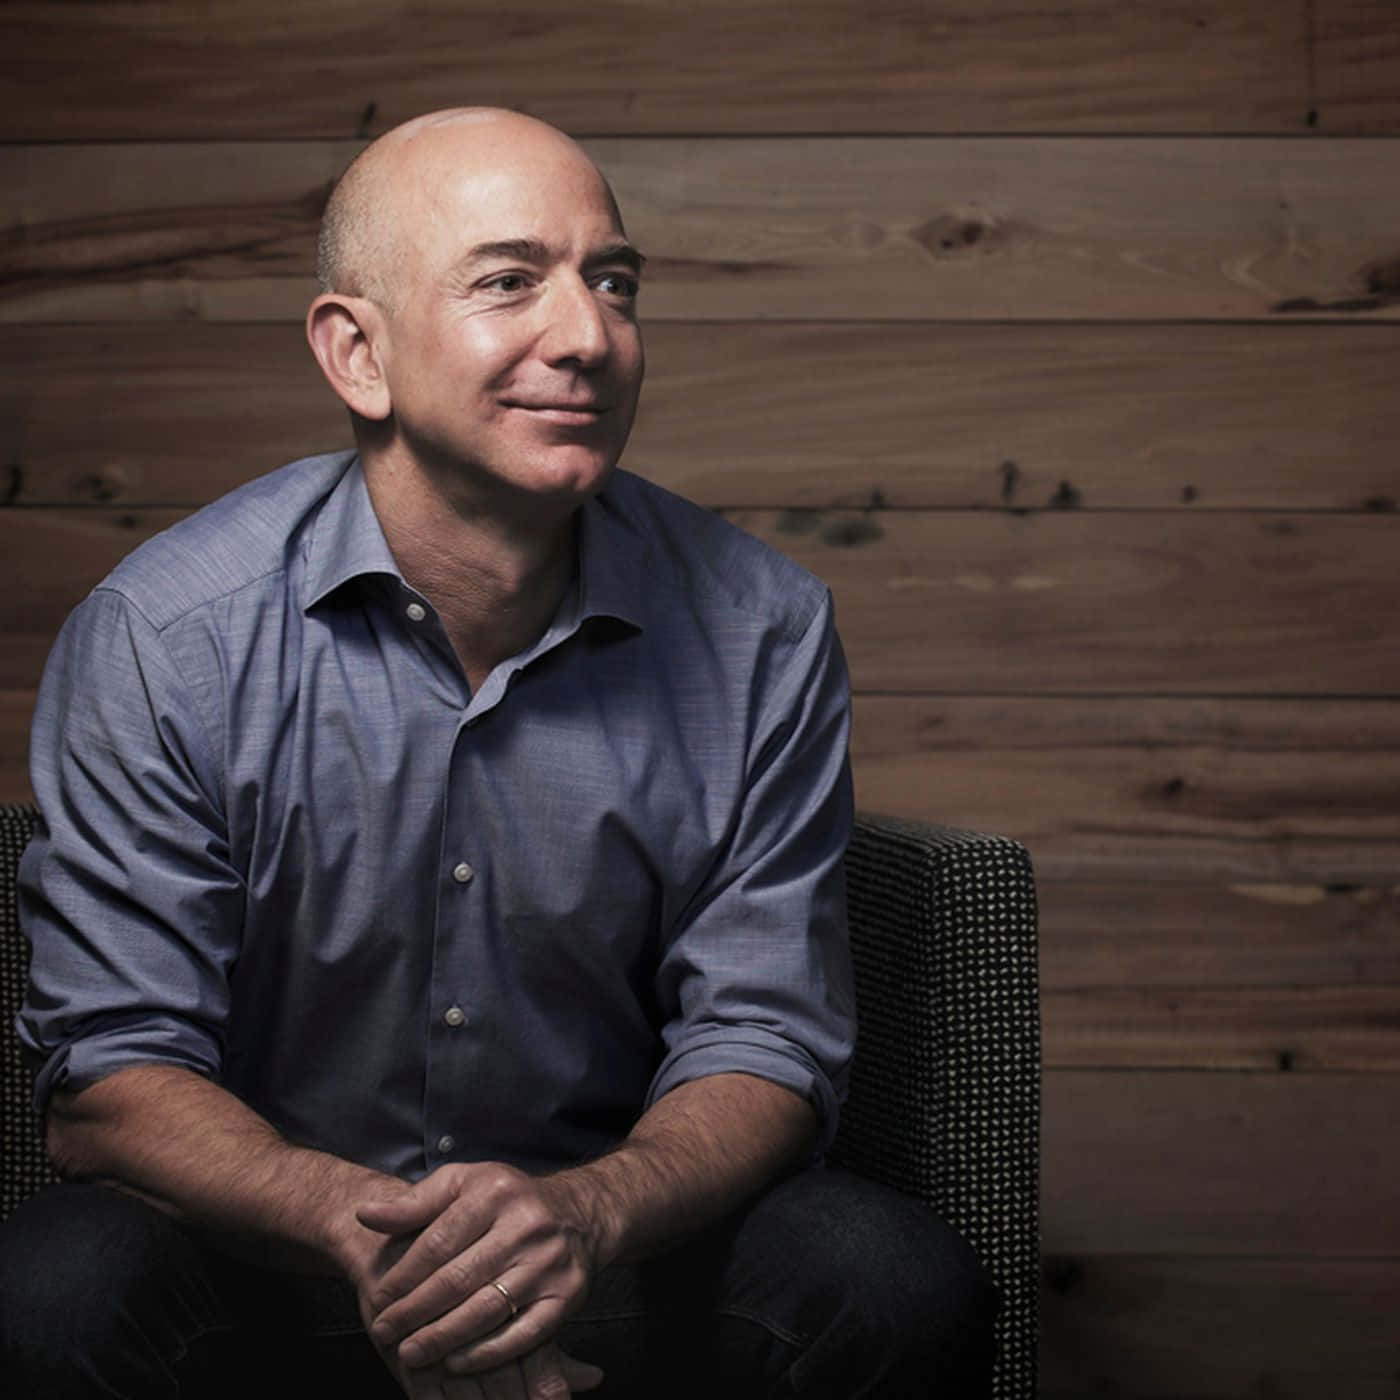 Jeff Bezos Smiling and Posing for a Portrait